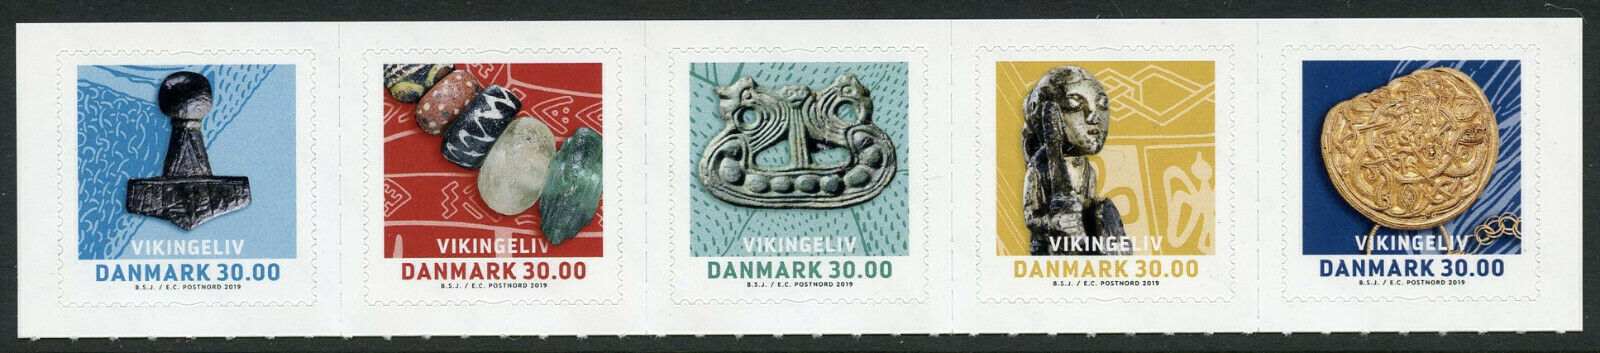 Denmark 2019 MNH Viking Art & Jewellery Jewelry 5v S/A Strip Artefacts Stamps